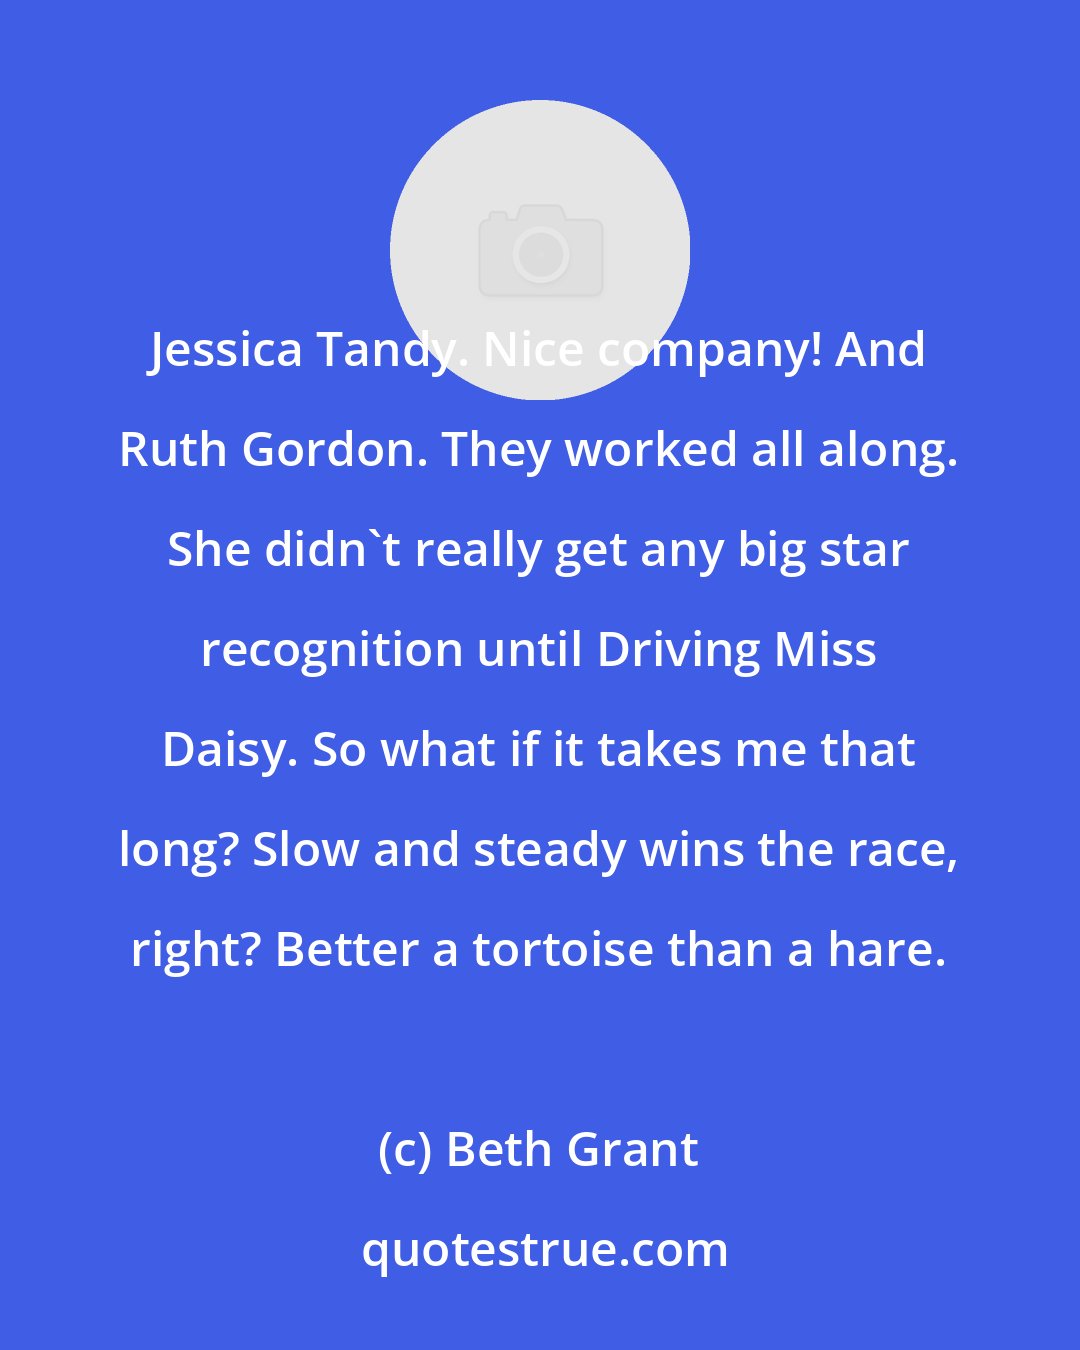 Beth Grant: Jessica Tandy. Nice company! And Ruth Gordon. They worked all along. She didn't really get any big star recognition until Driving Miss Daisy. So what if it takes me that long? Slow and steady wins the race, right? Better a tortoise than a hare.